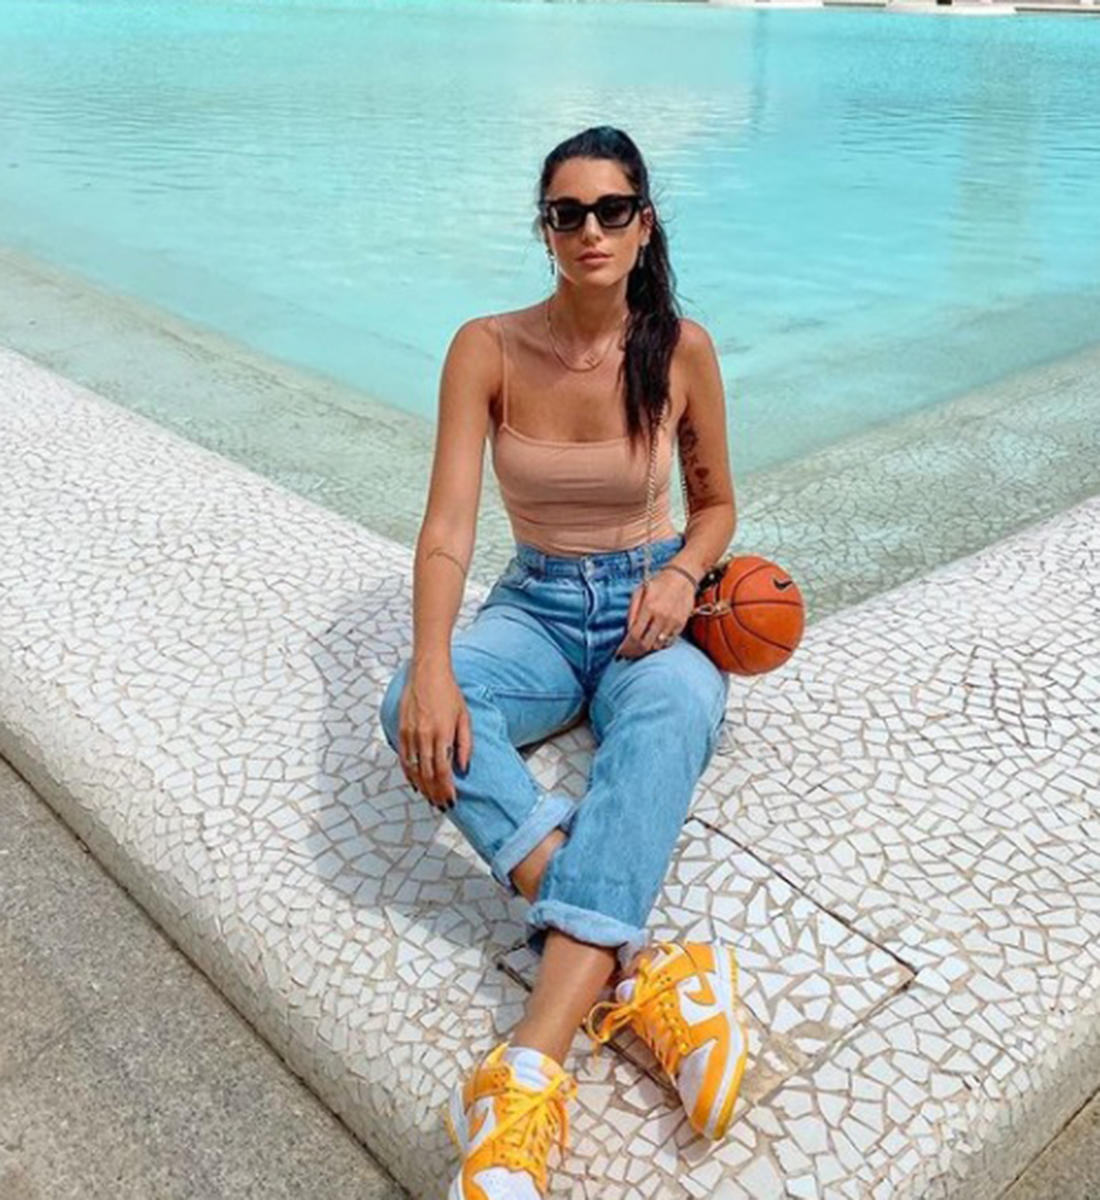 Valentina is probably the hottest basketball player! 30